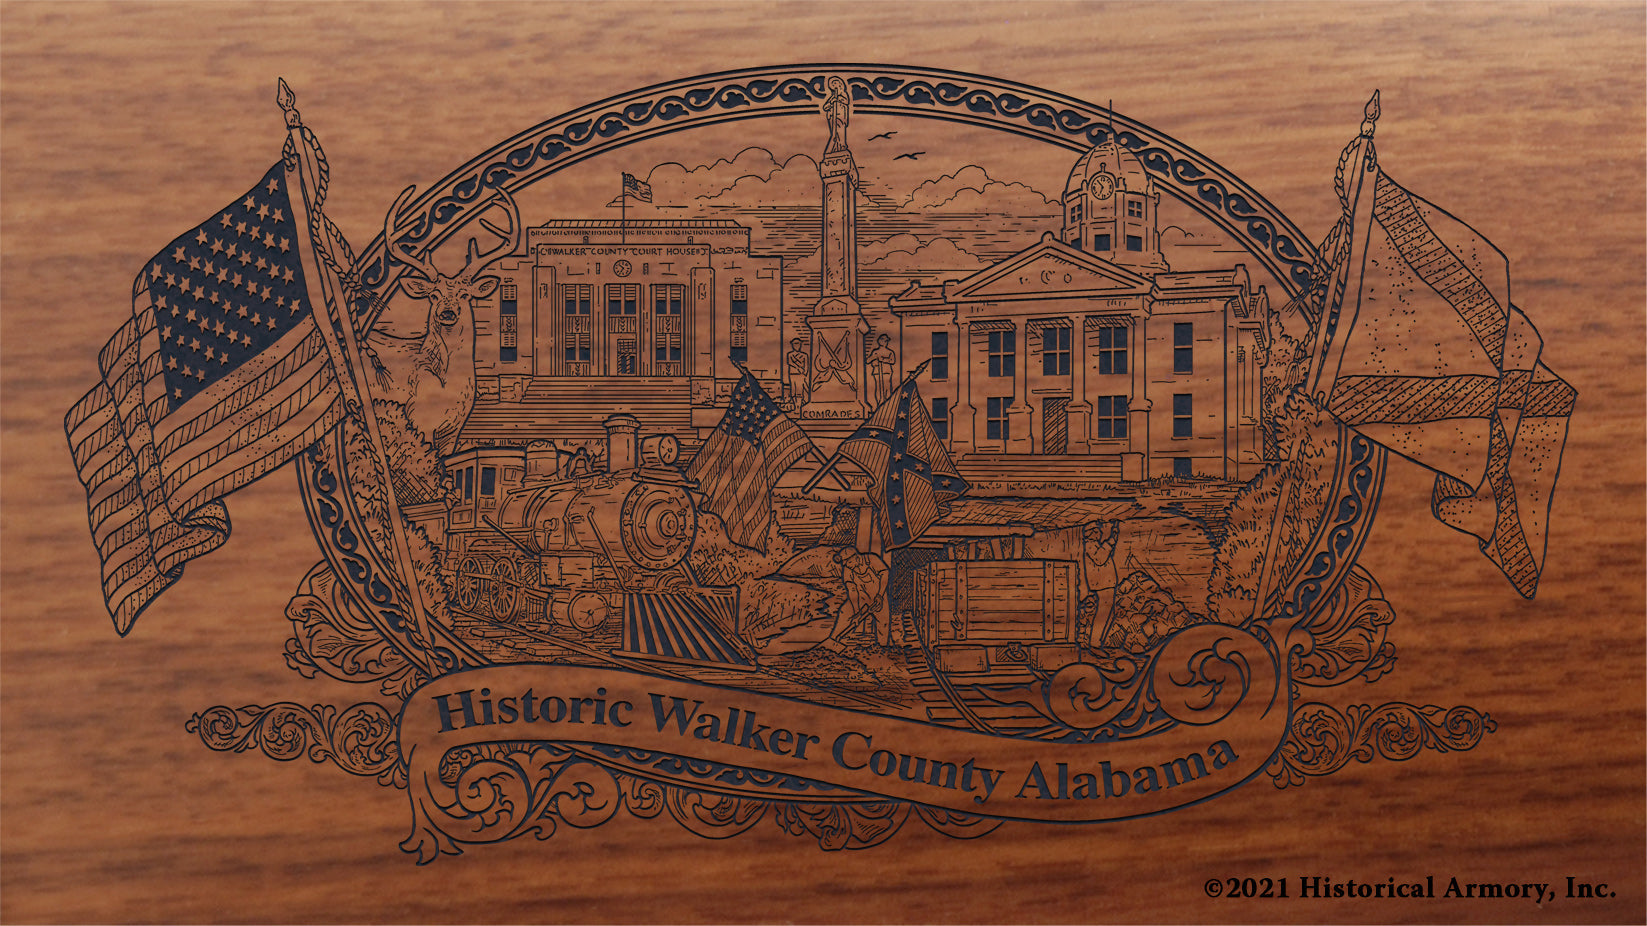 Engraved artwork | History of Walker County Alabama | Historical Armory